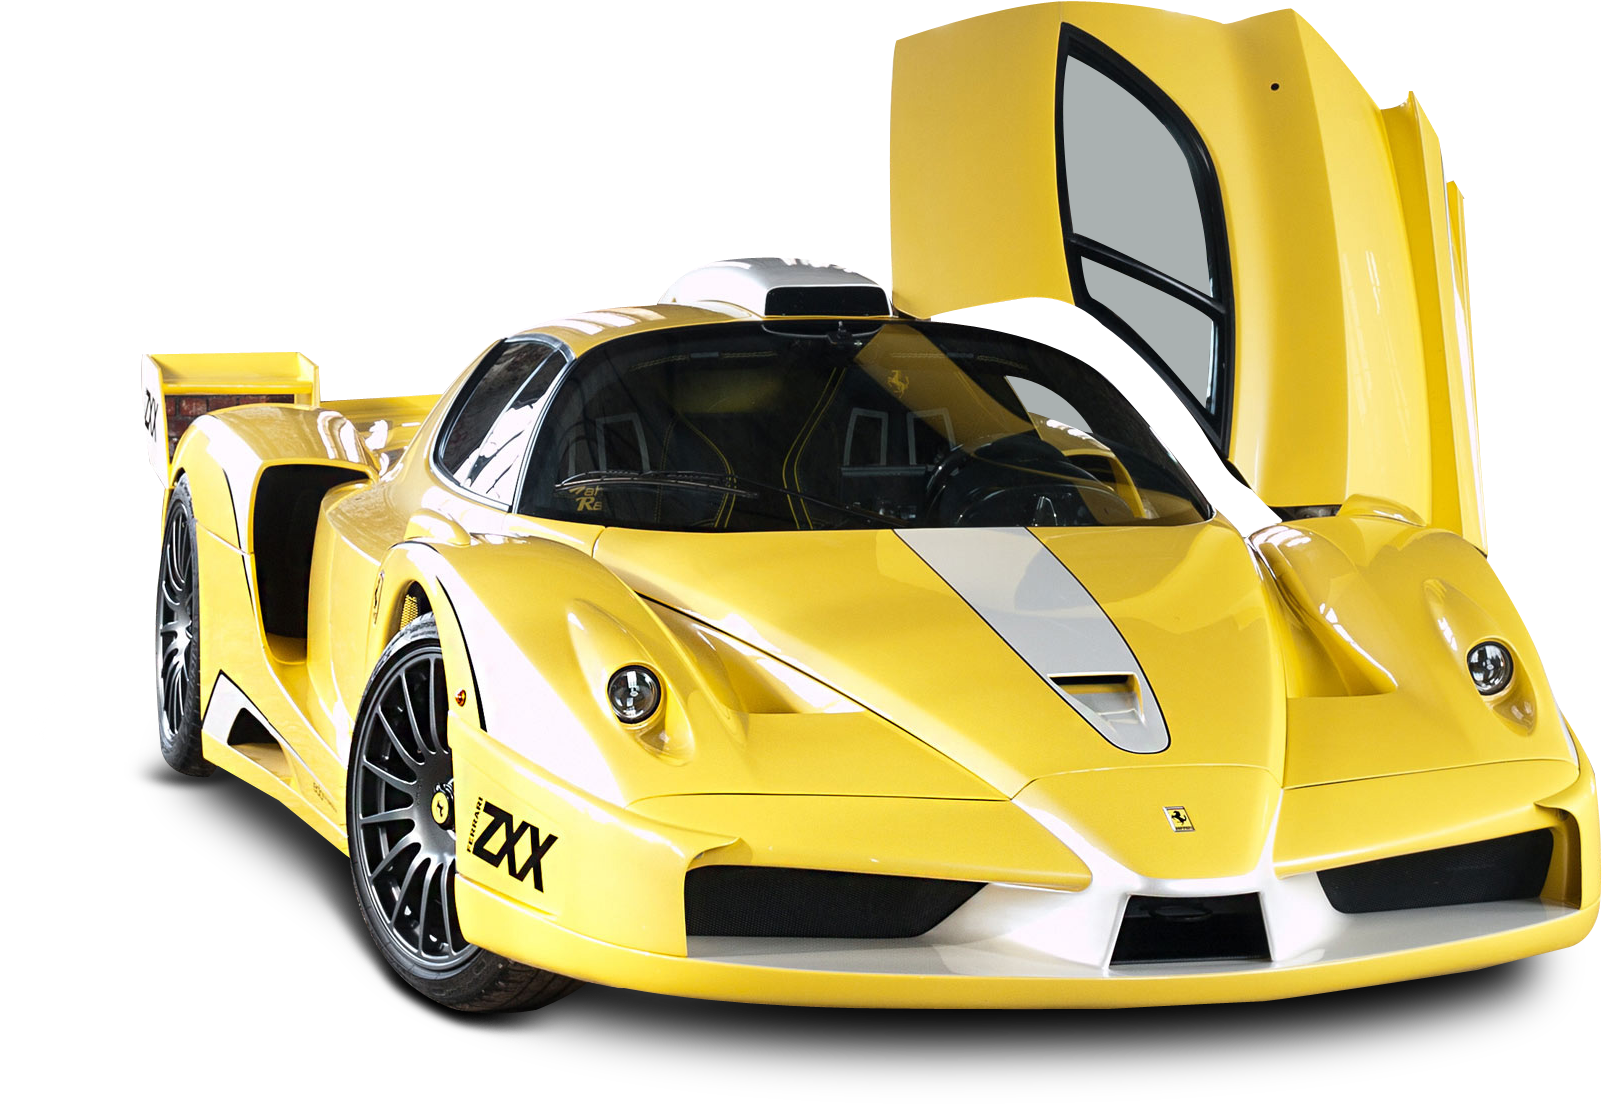 A Yellow Sports Car With Its Doors Open